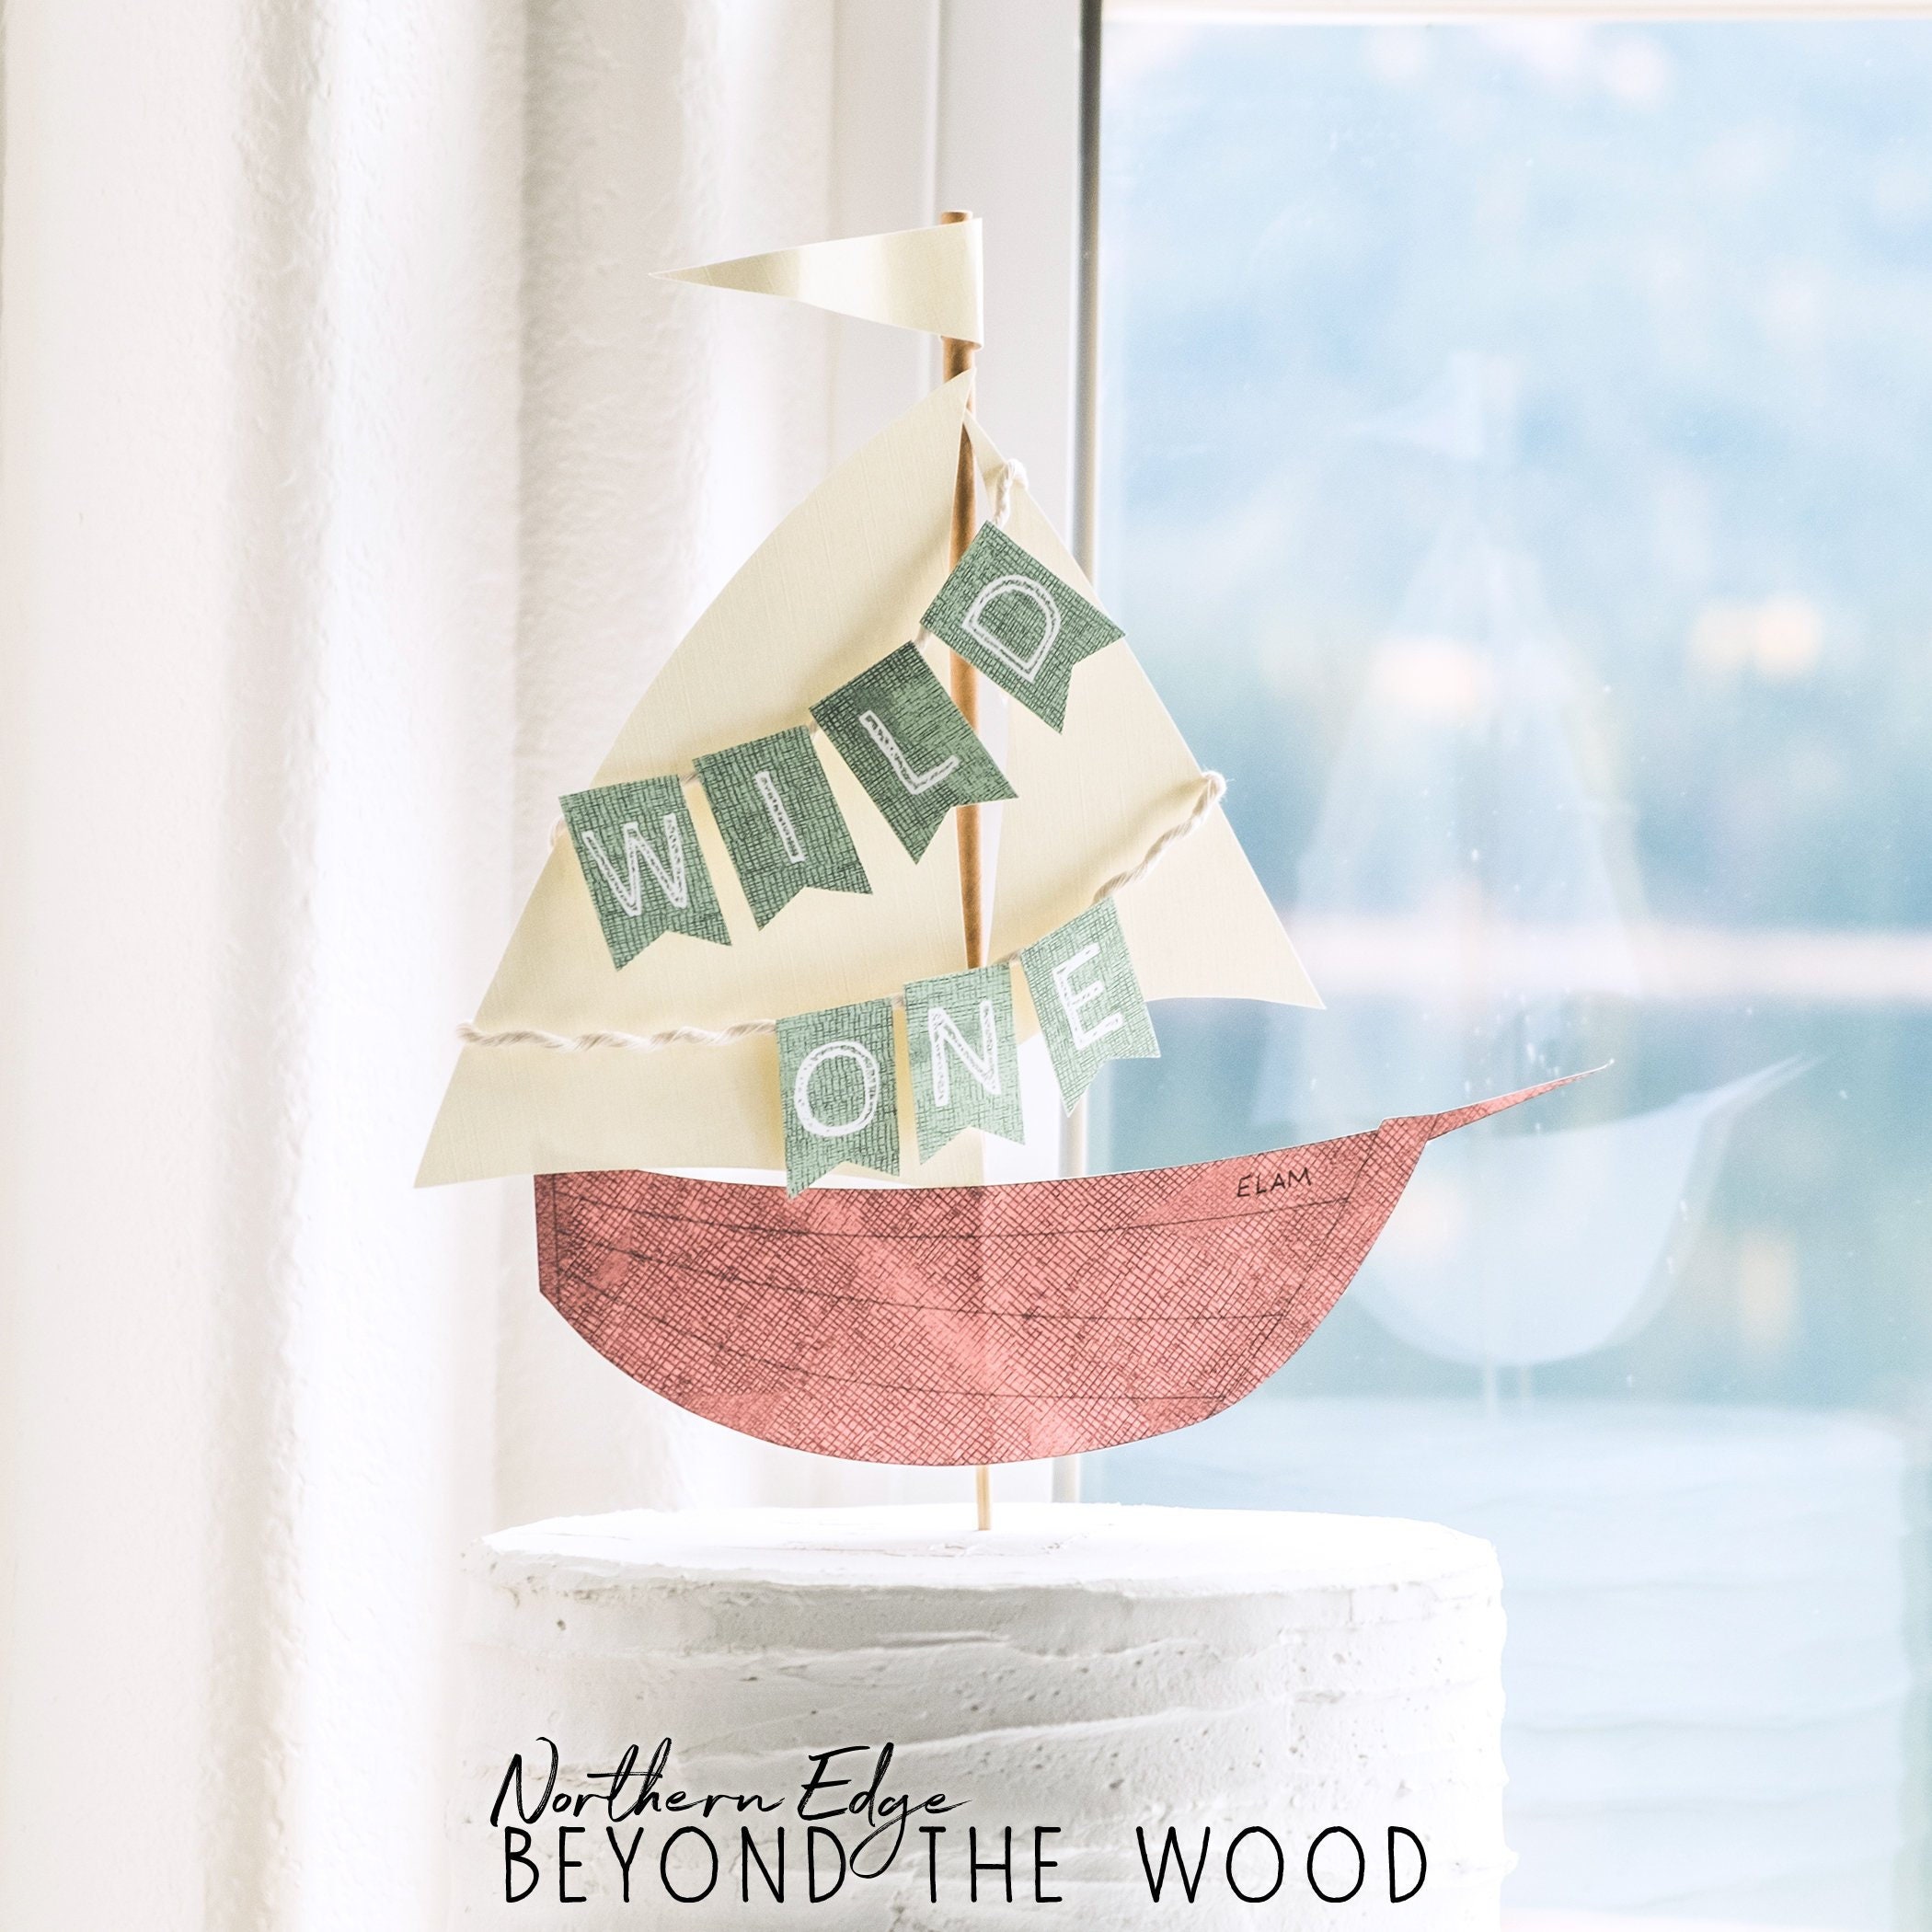 WHERE THE WILD Things Are Boat Prop, Little Red Sail Boat Infant